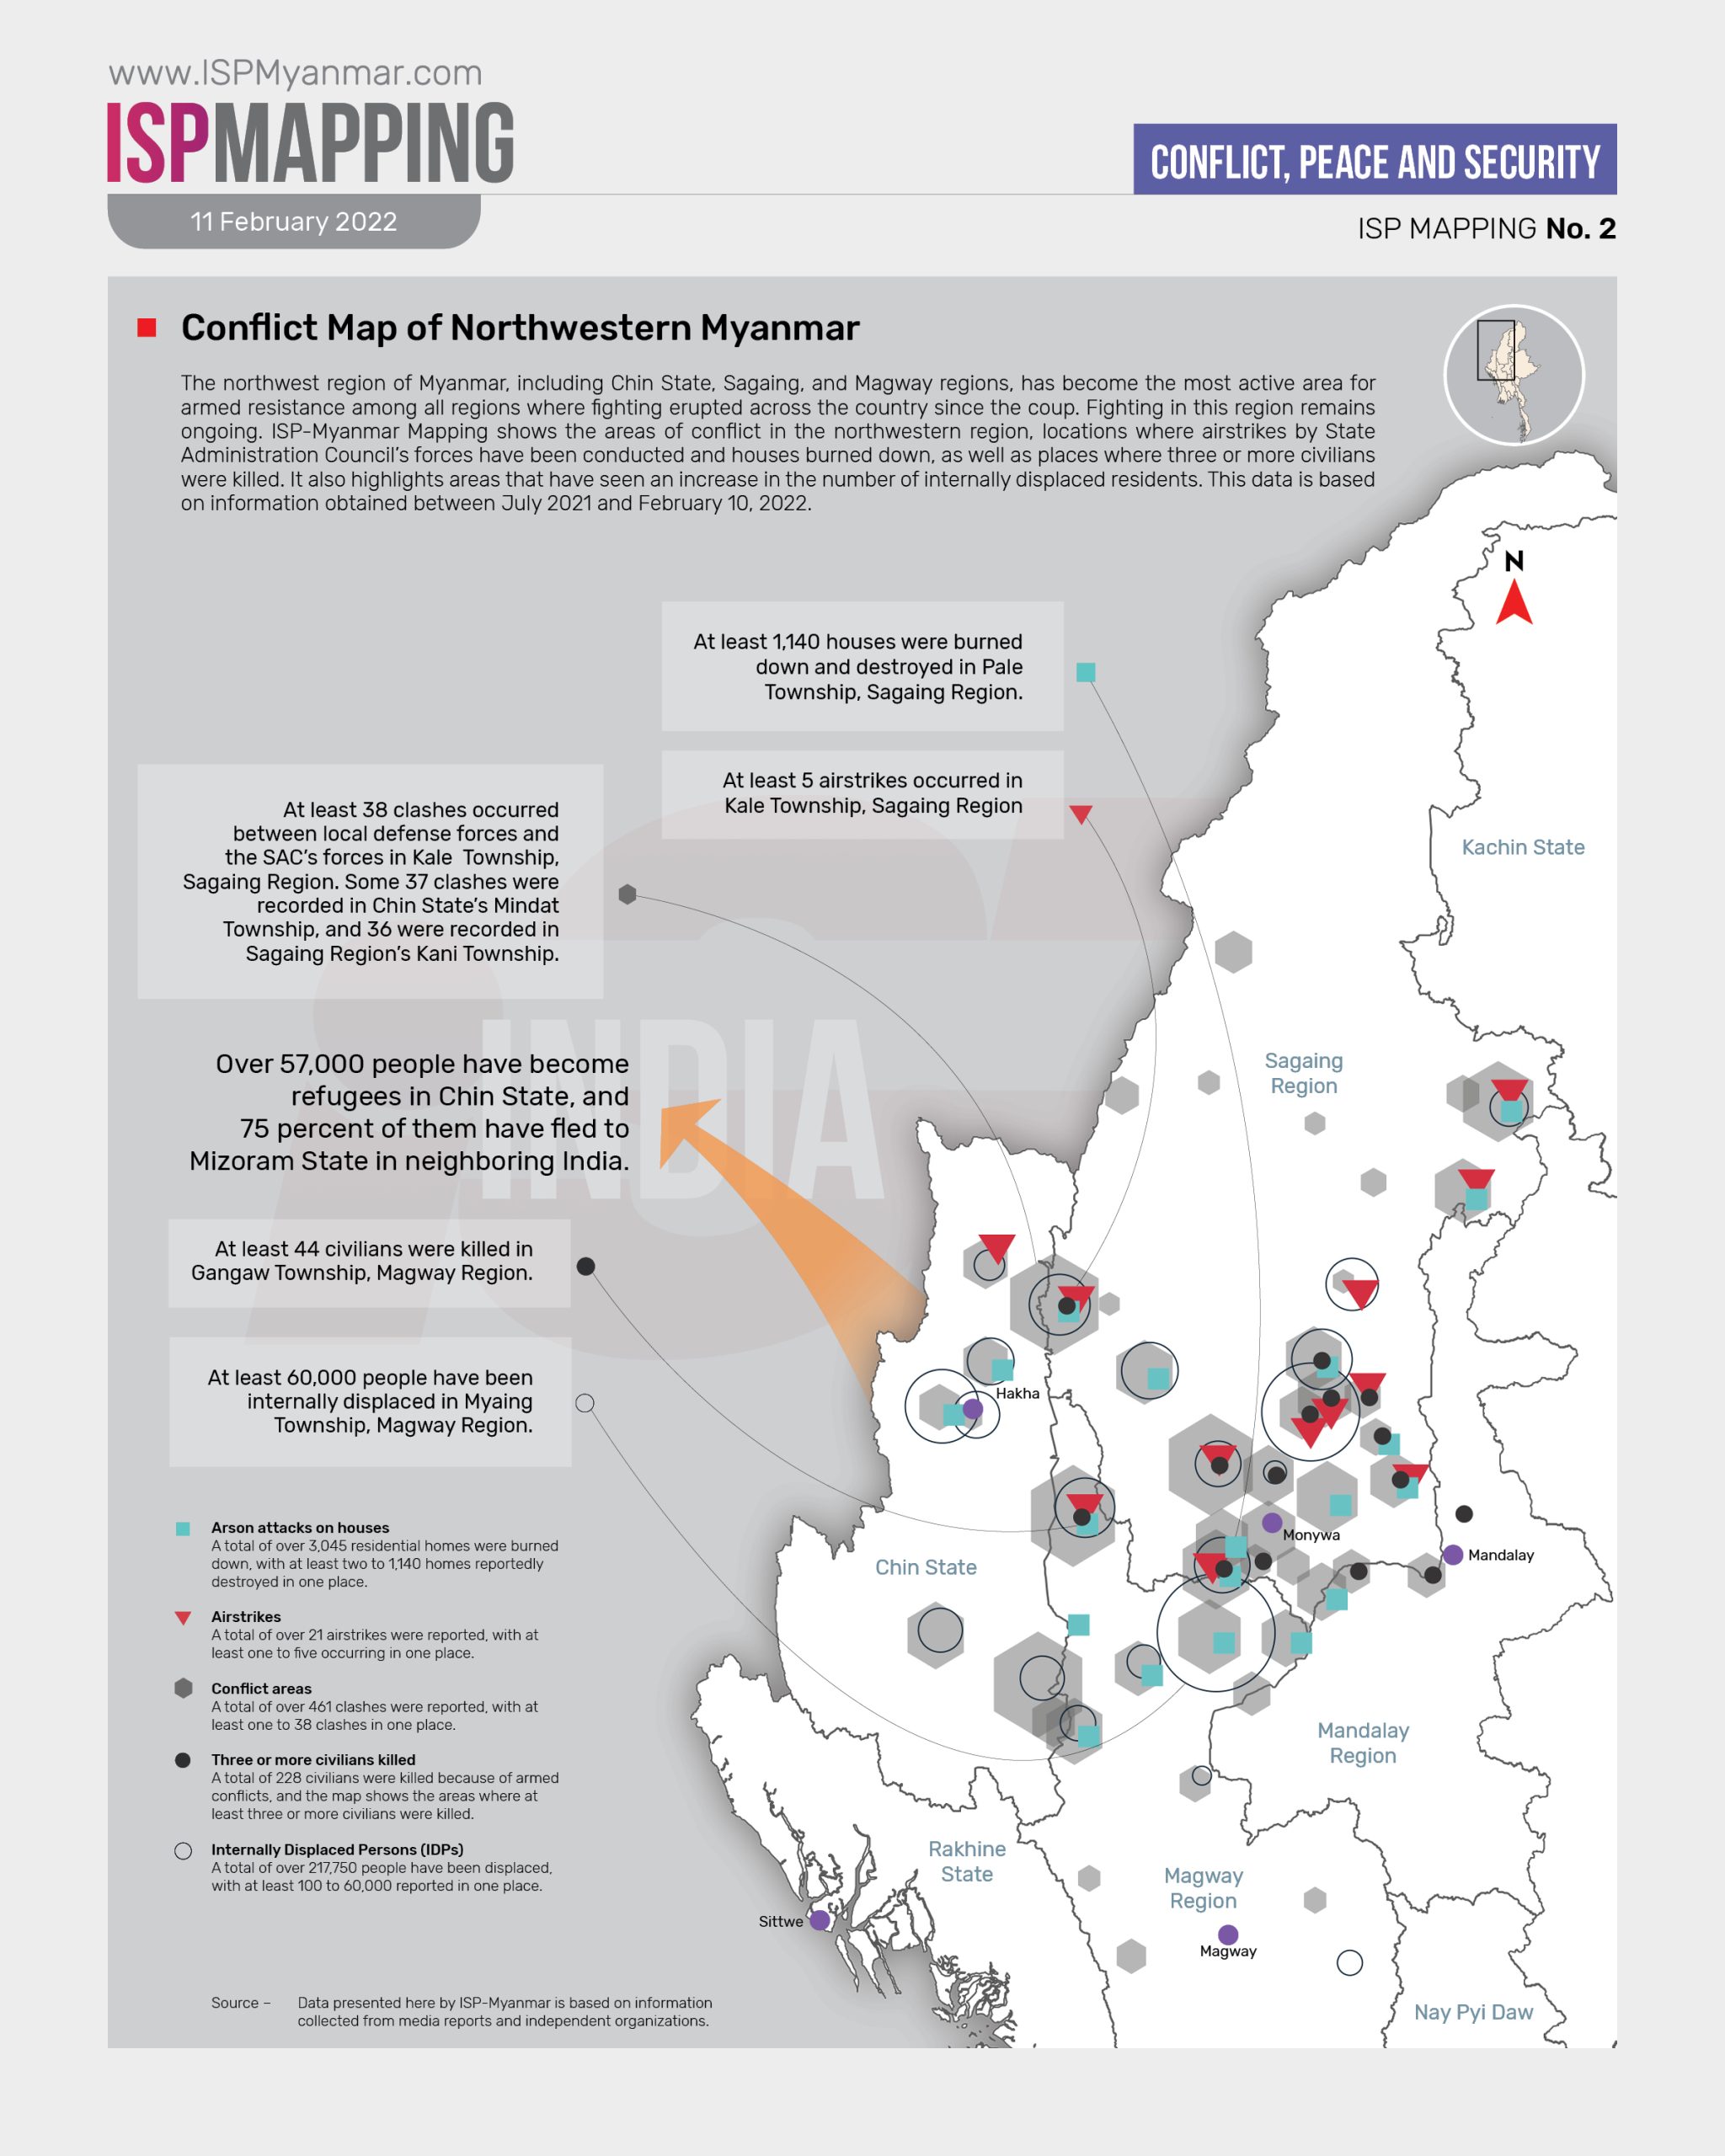 Mapping 2 - Conflict Map of Northwestern Myanmar